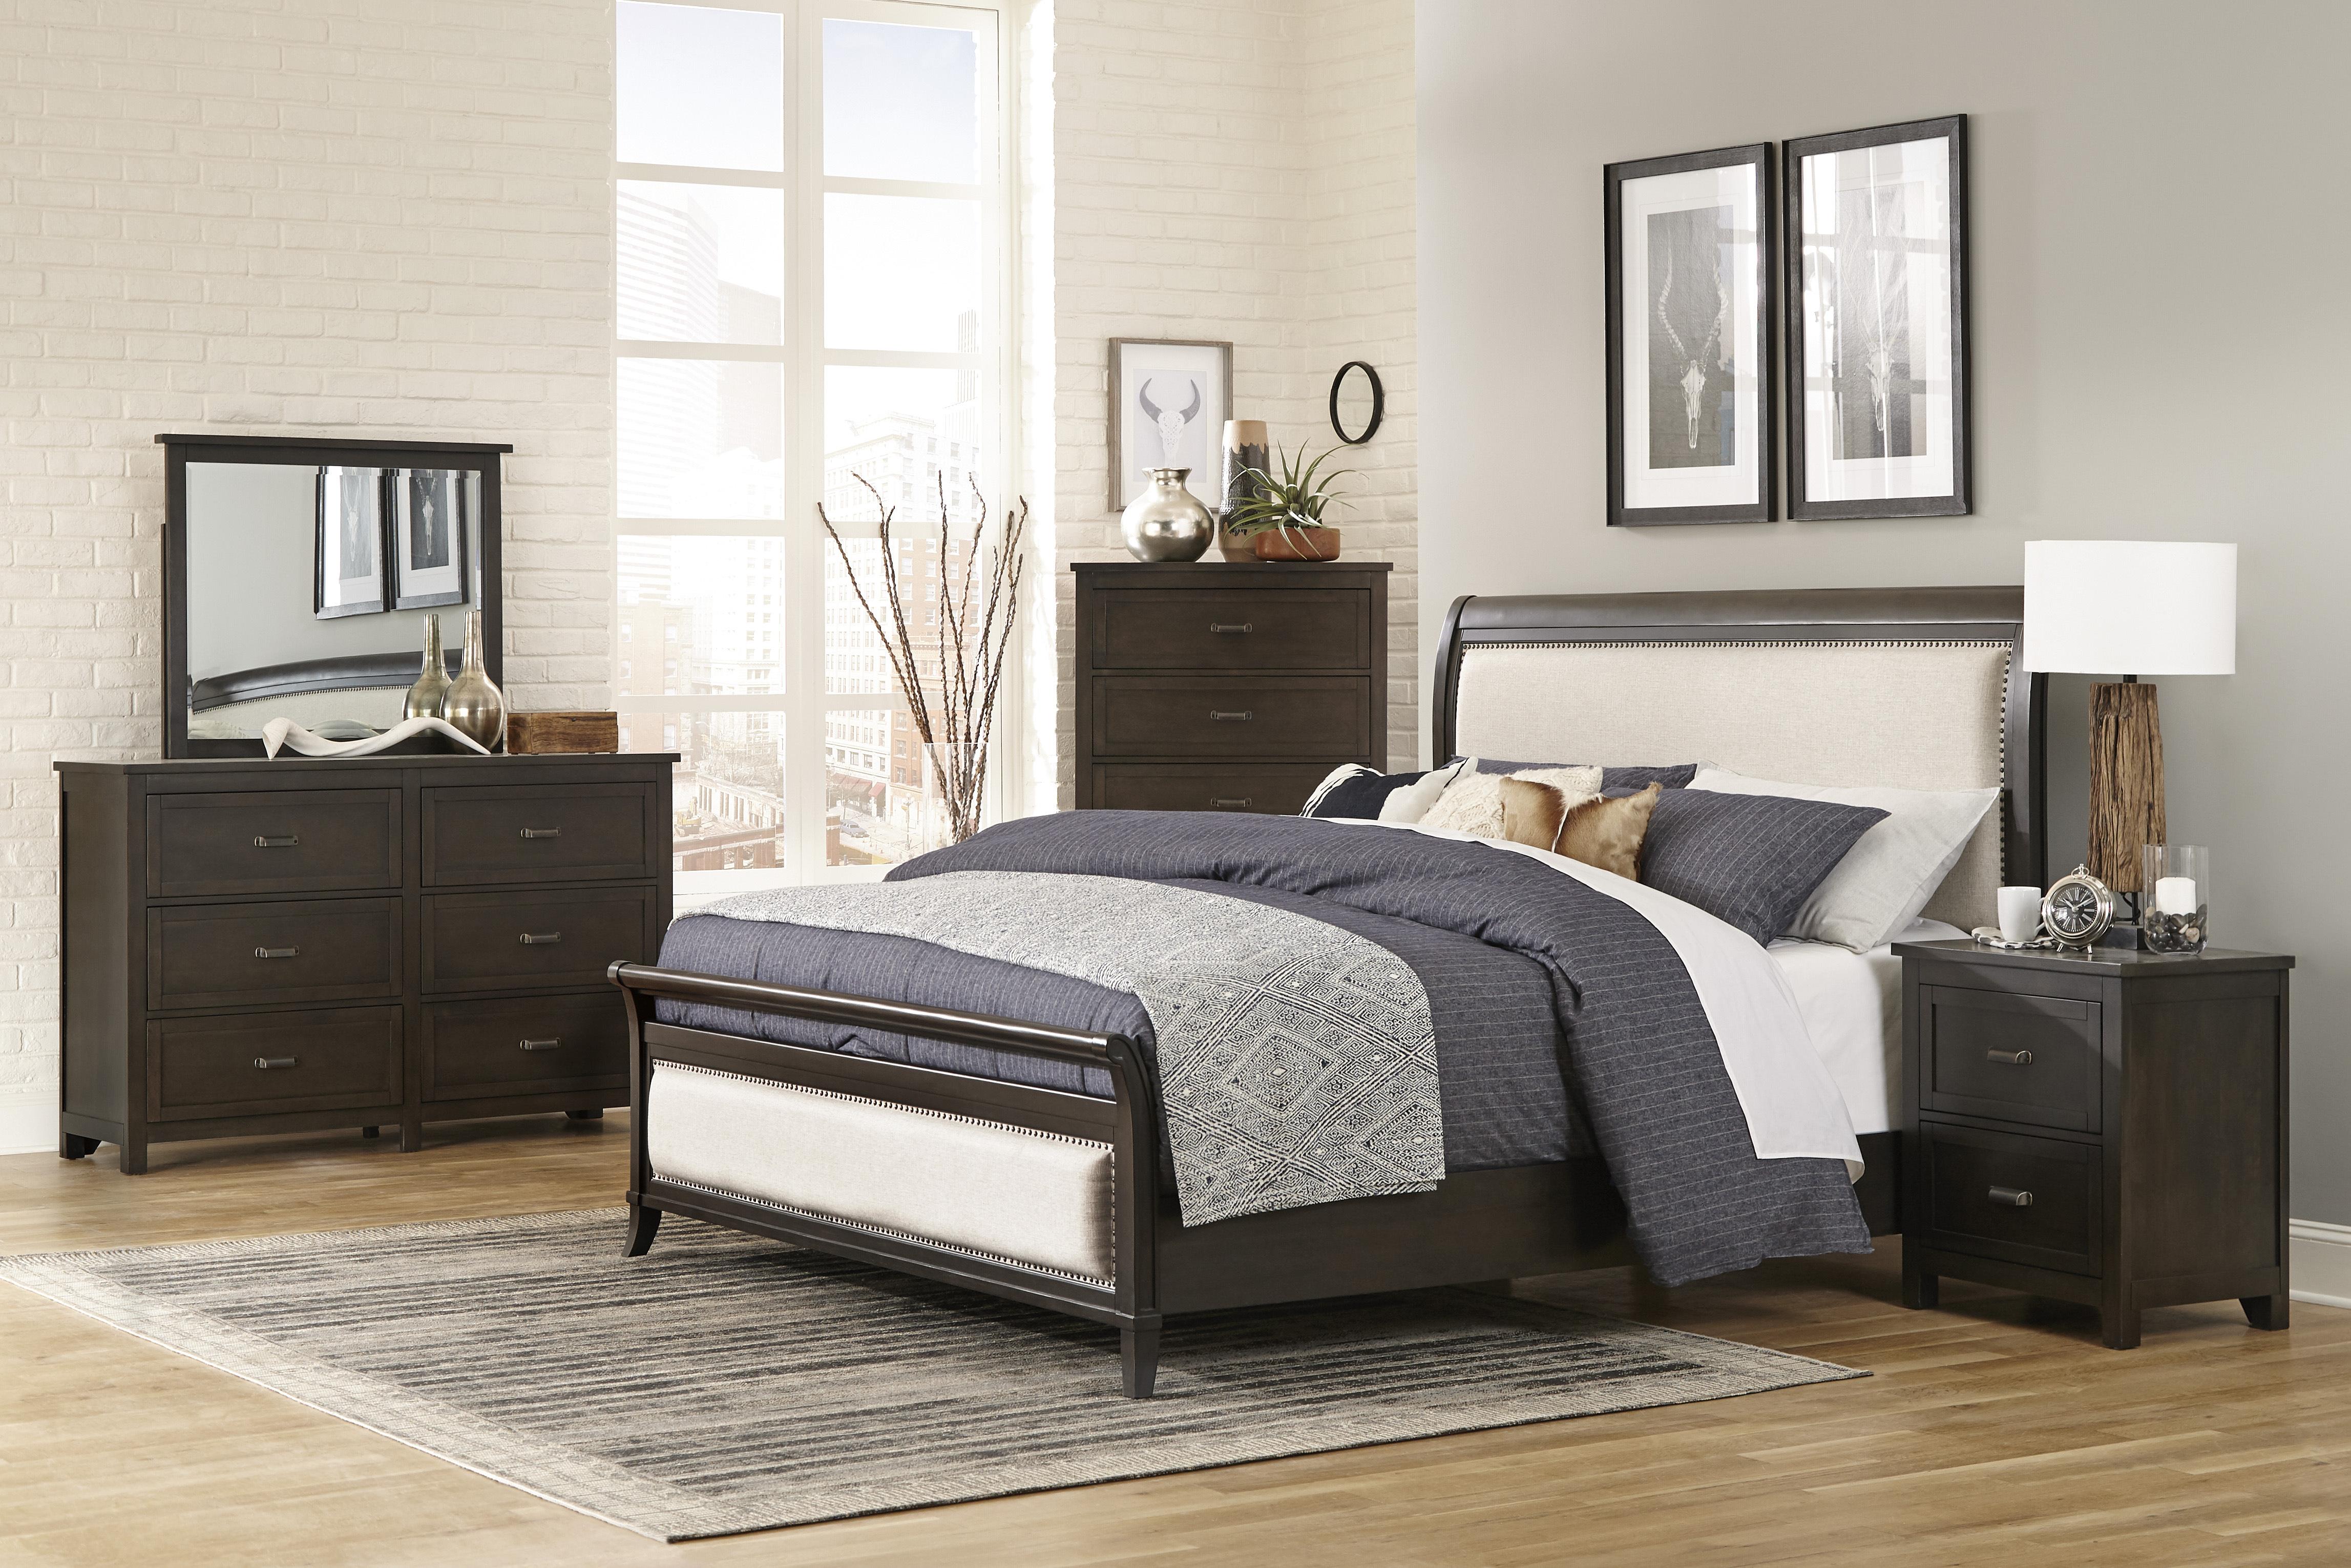 Transitional Bedroom Set 1923NB-1-5PC Hebron 1923NB-1-5PC in Dark Cherry Polyester